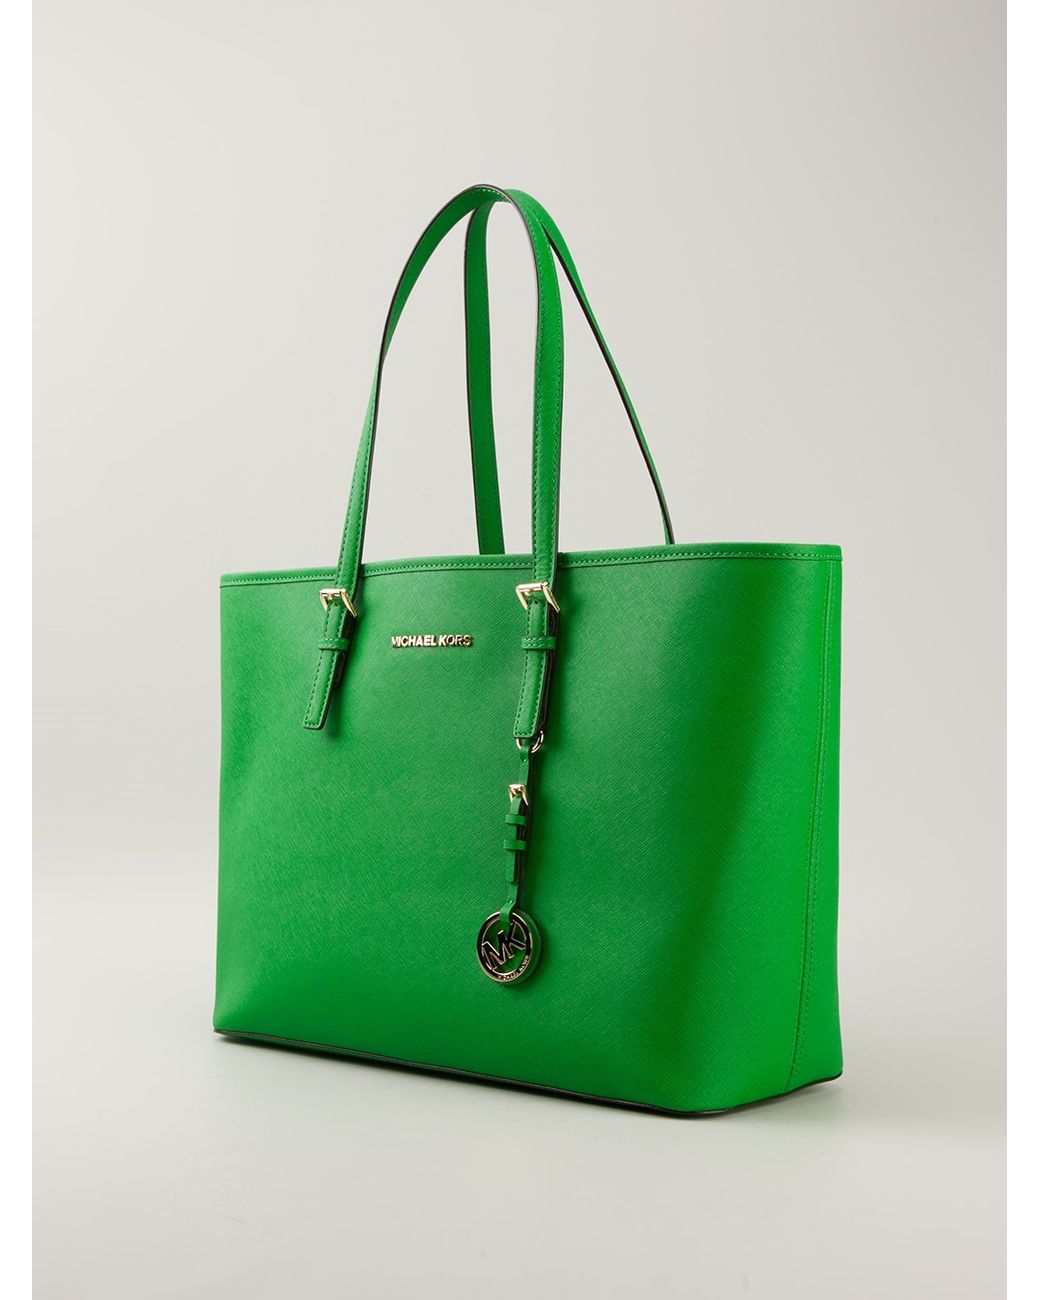 Michael Kors Emilia Large Pebbled Leather Tote Bag in Green  Lyst